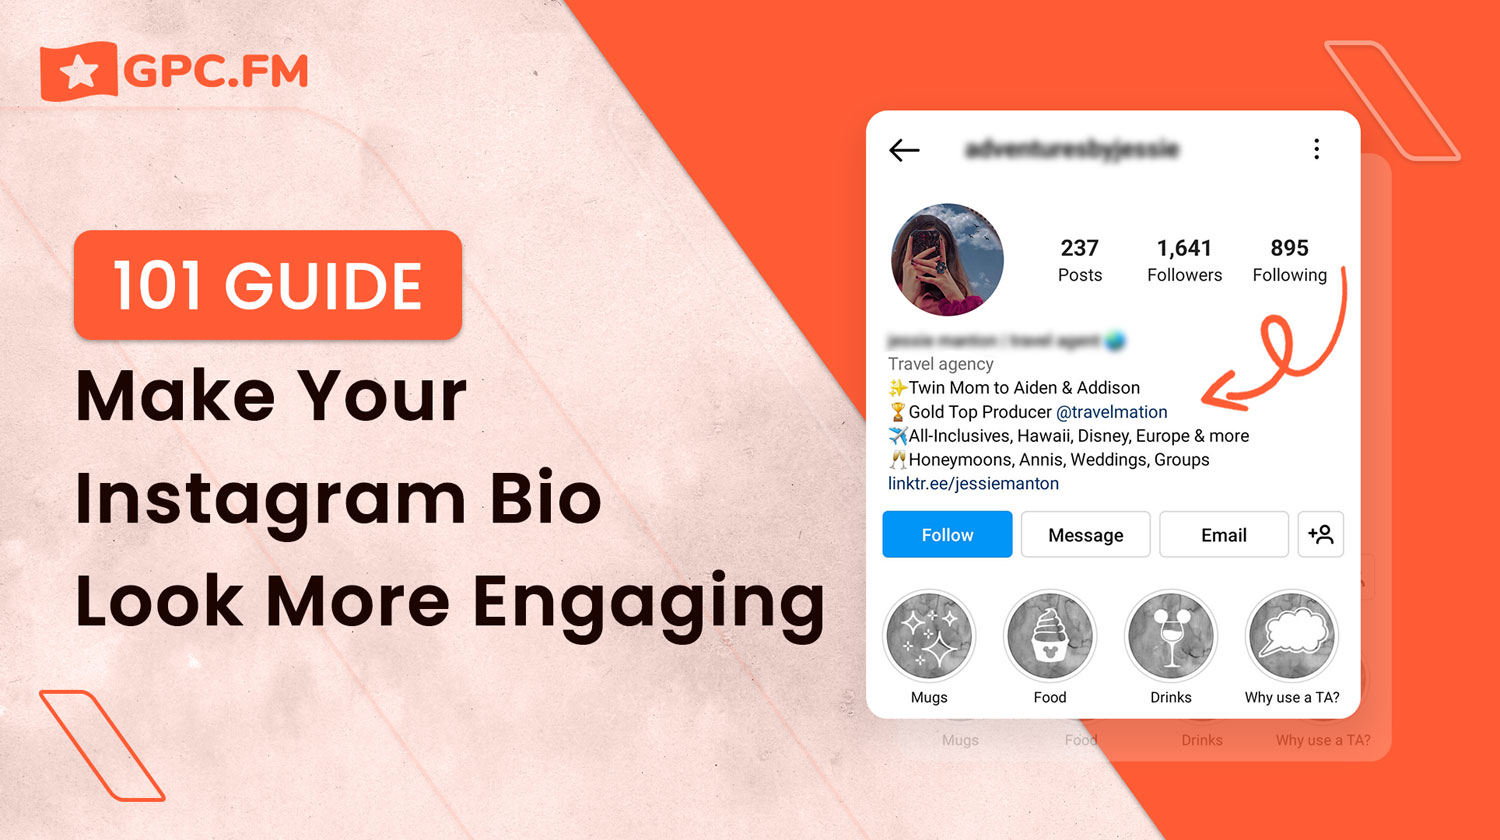 How To Make Your Instagram Bio Look More Engaging: 101 Guide